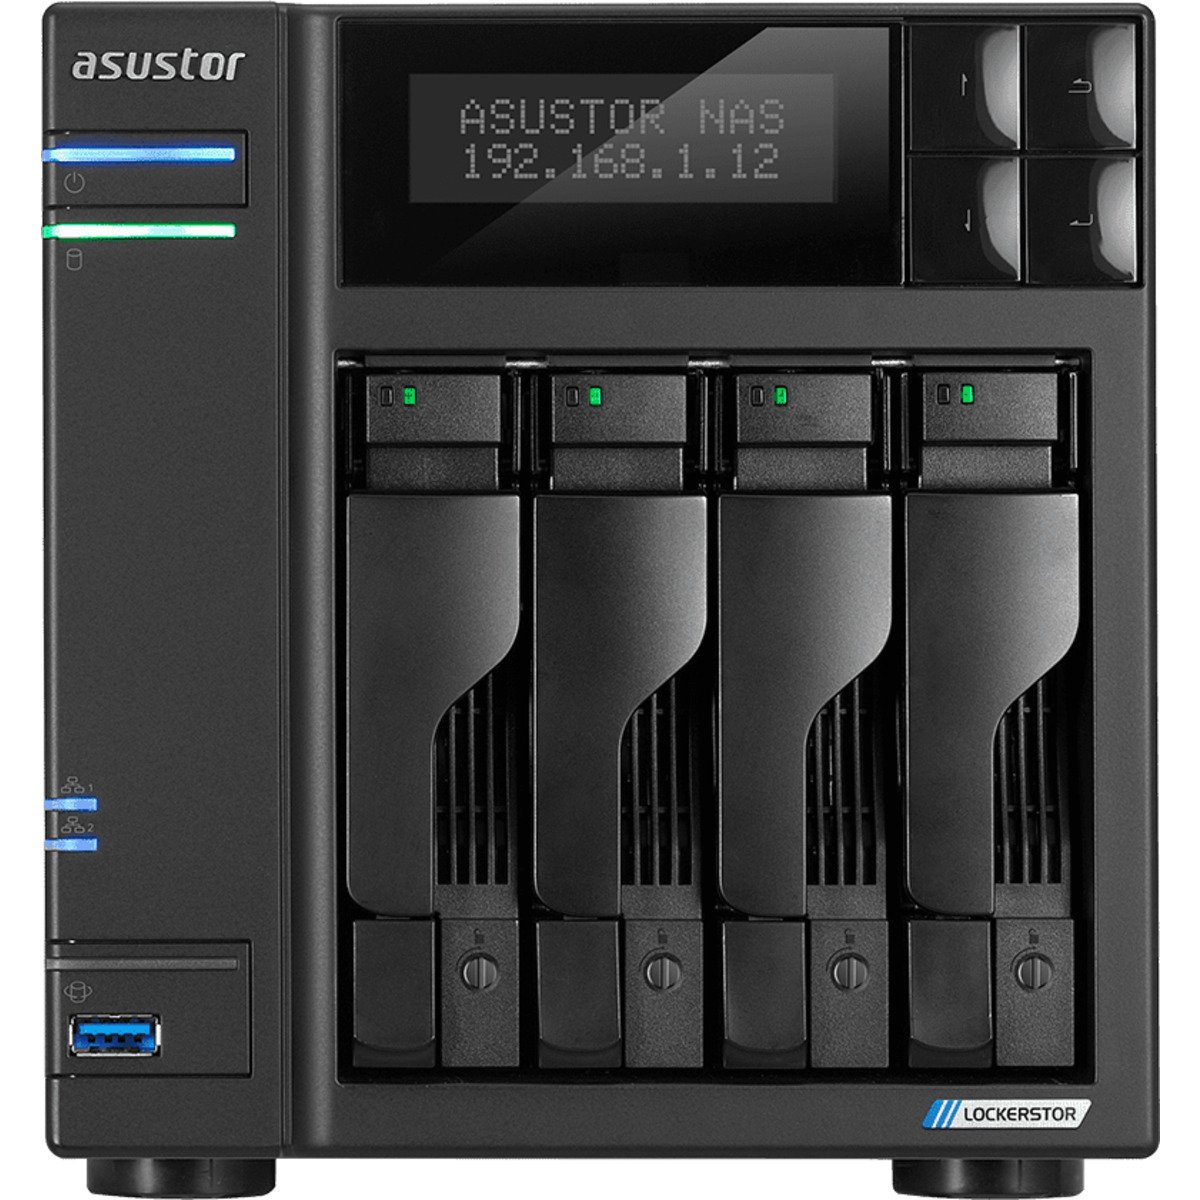 ASUSTOR AS6604T Lockerstor 4 96tb 4-Bay Desktop Multimedia / Power User / Business NAS - Network Attached Storage Device 4x24tb Seagate IronWolf Pro ST24000NT002 3.5 7200rpm SATA 6Gb/s HDD NAS Class Drives Installed - Burn-In Tested - FREE RAM UPGRADE AS6604T Lockerstor 4